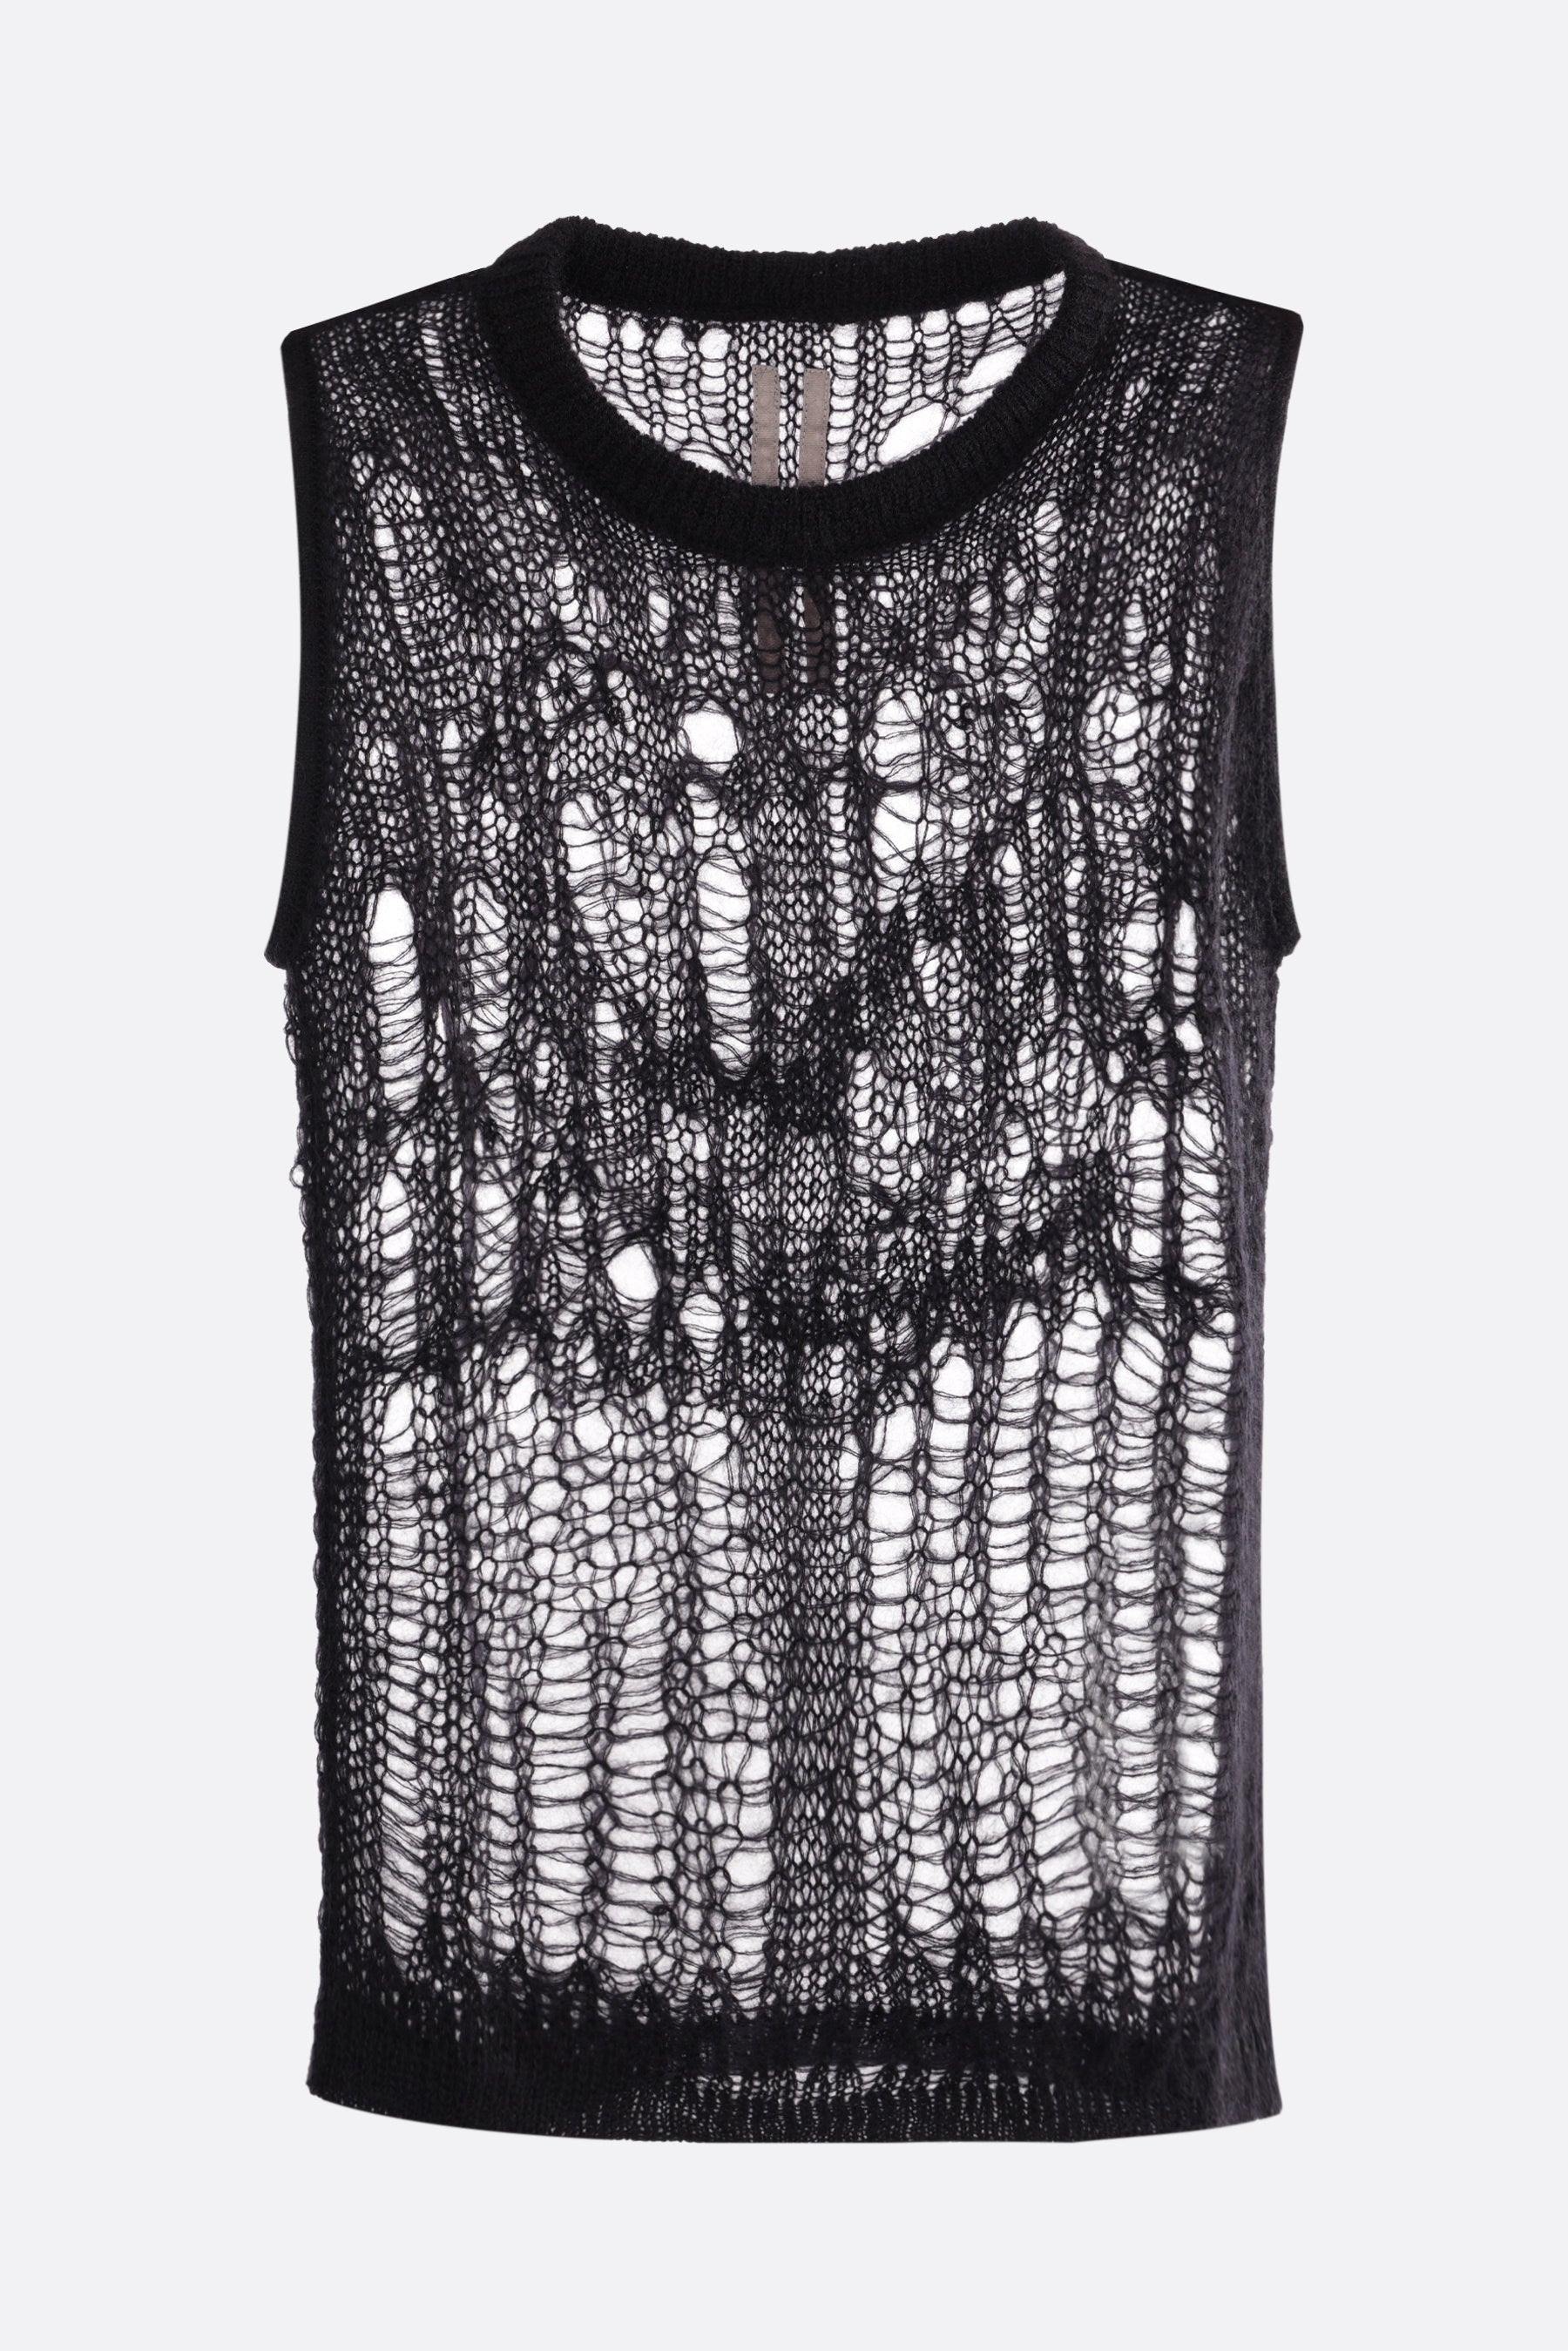 Spider knit sleeveless top